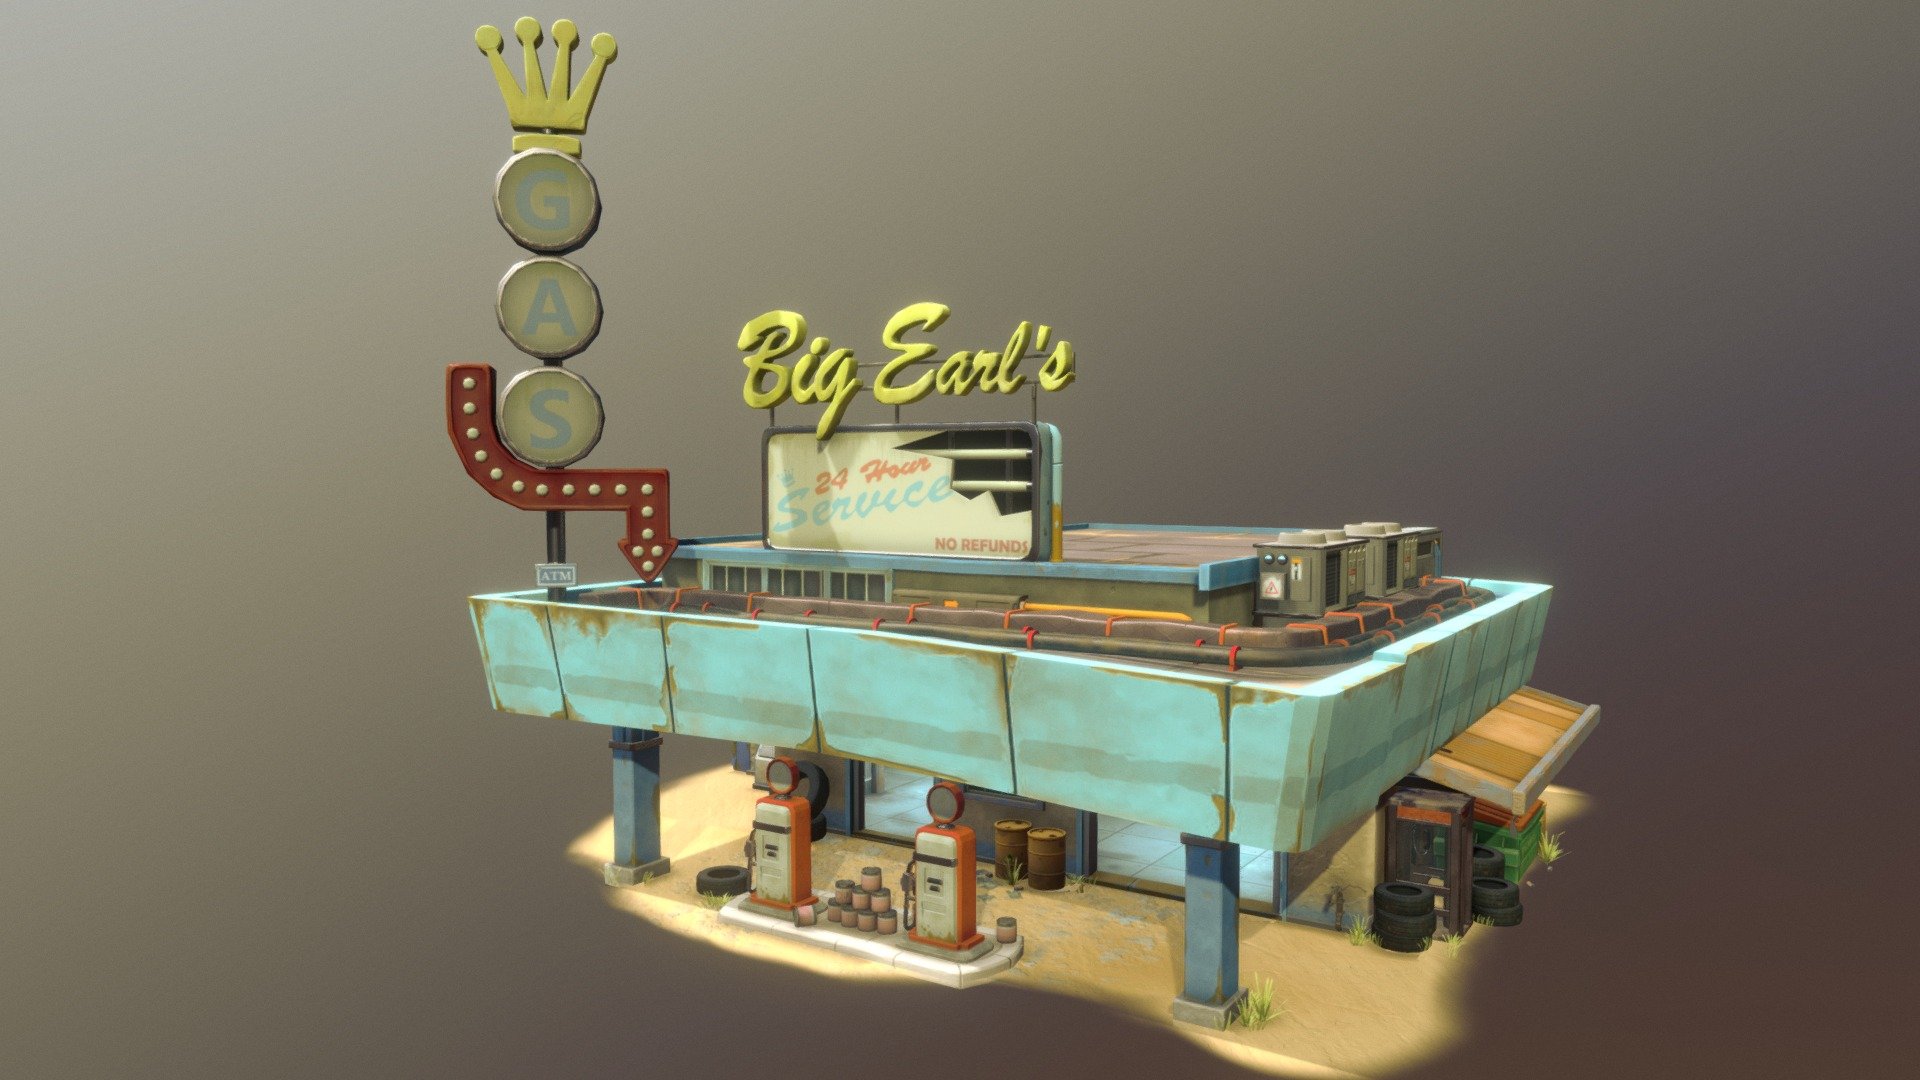 my attempt at recreating the big earls garage from the map route 66 from the game Overwatch, i have always liked the art style of Overwatch and i thought this would be a good group of assets to bring over and re create 3d model